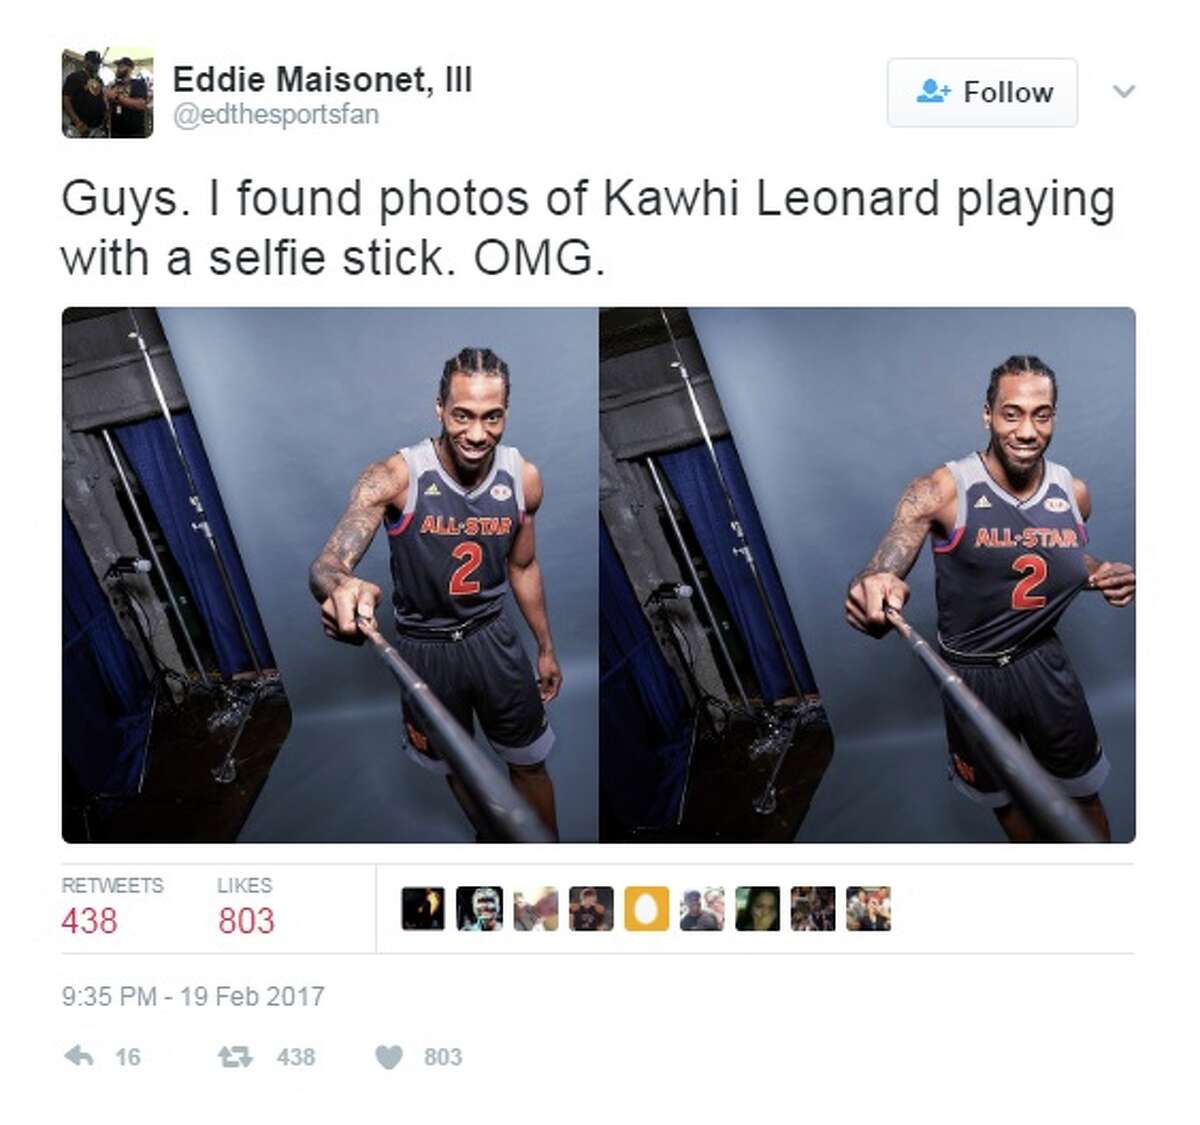 Kawhi Leonard may have glitched during his second consecutive All-Star Game appearance in New Orleans, because new photos show the stoic Spur carrying a geeky selfie stick and smile to match. See original tweet here.